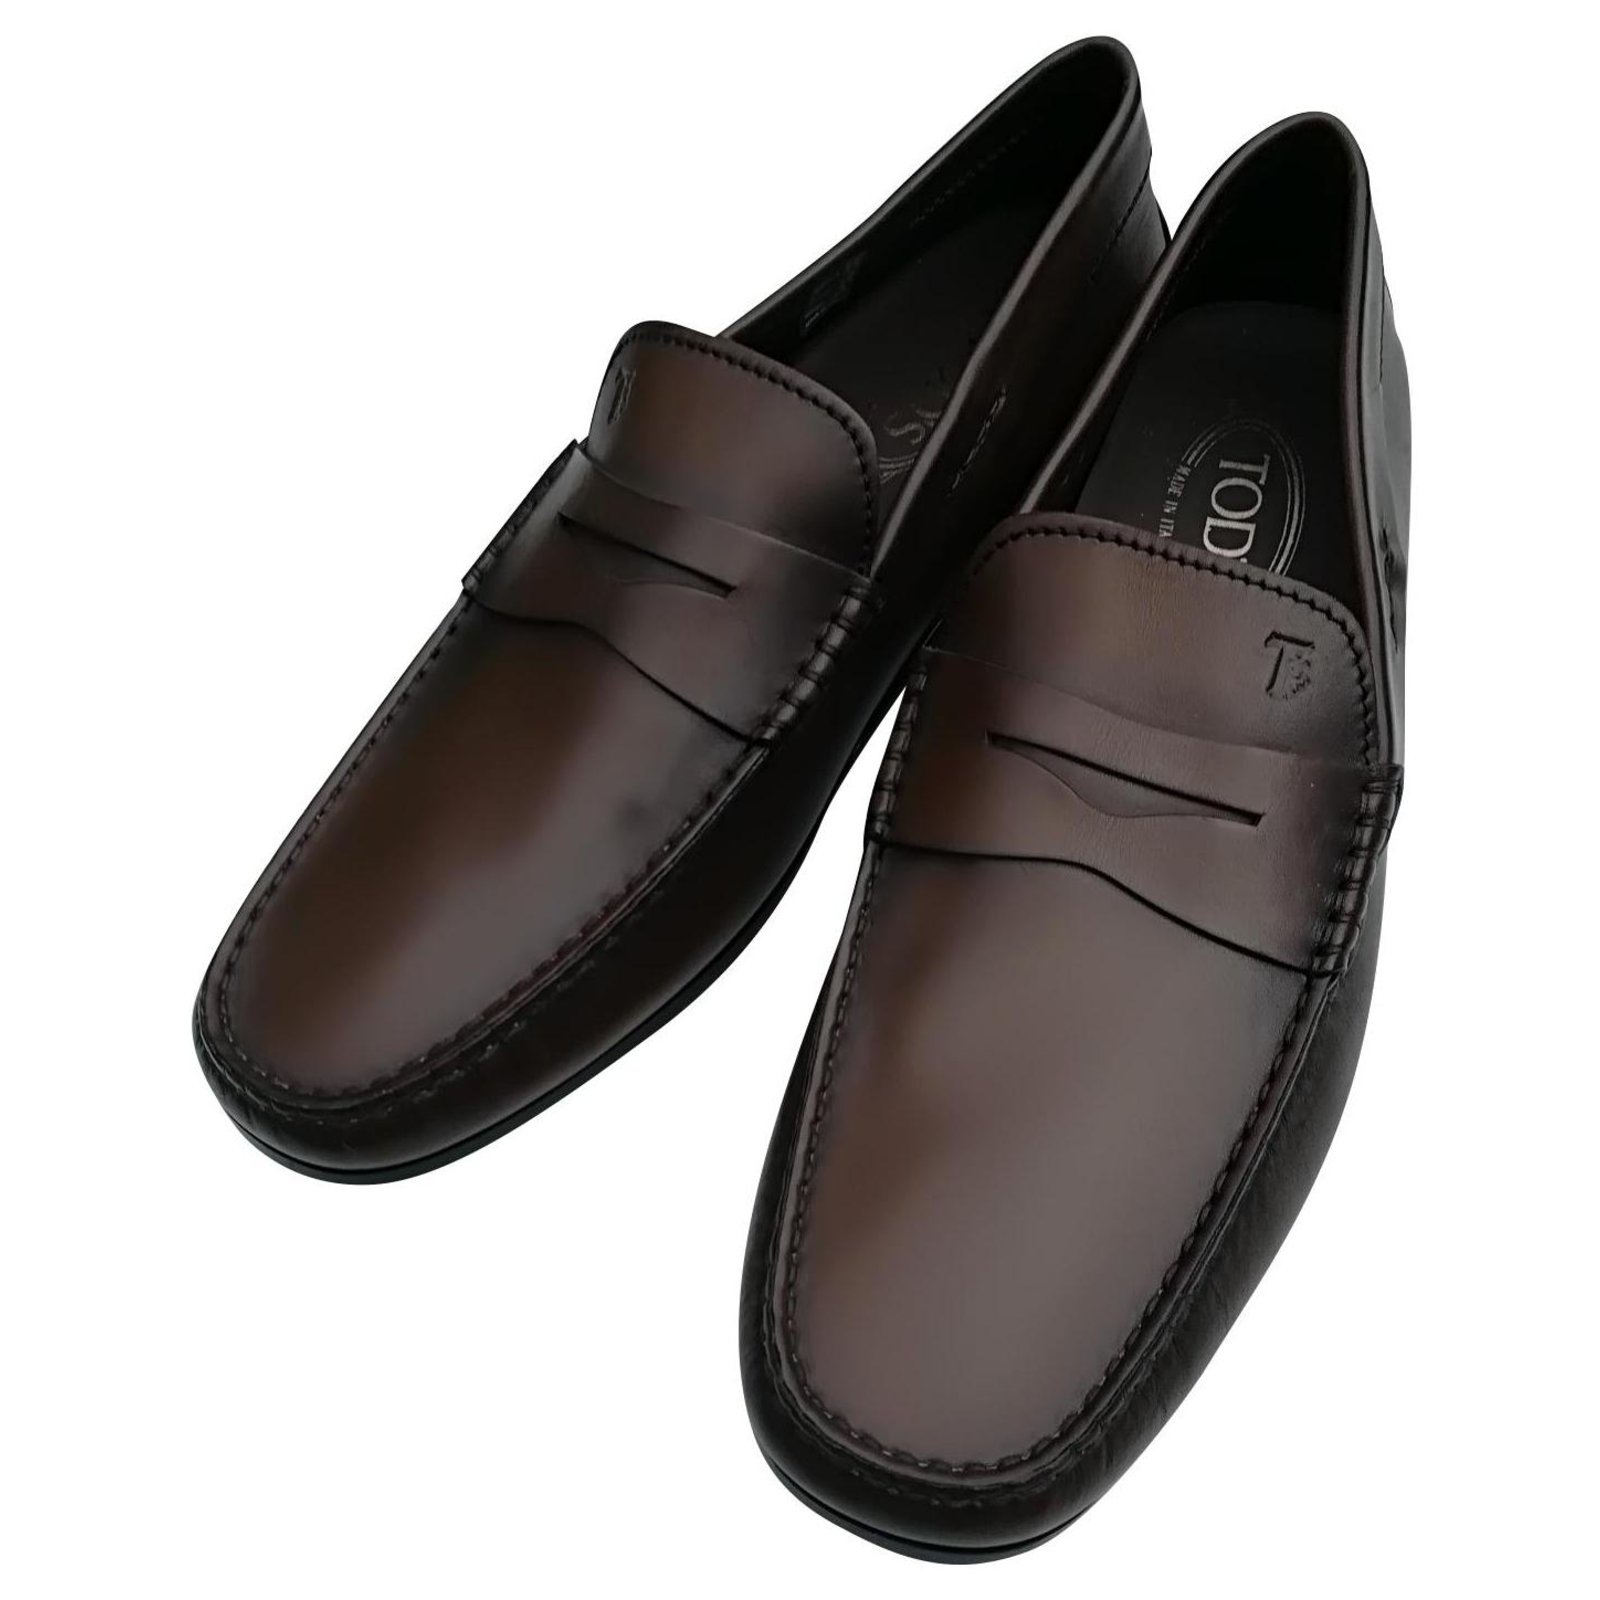 Mocassins TODS 43,5 marron Homme Chaussures Tods Homme Mocassins Tods Homme Mocassins Tods Homme 